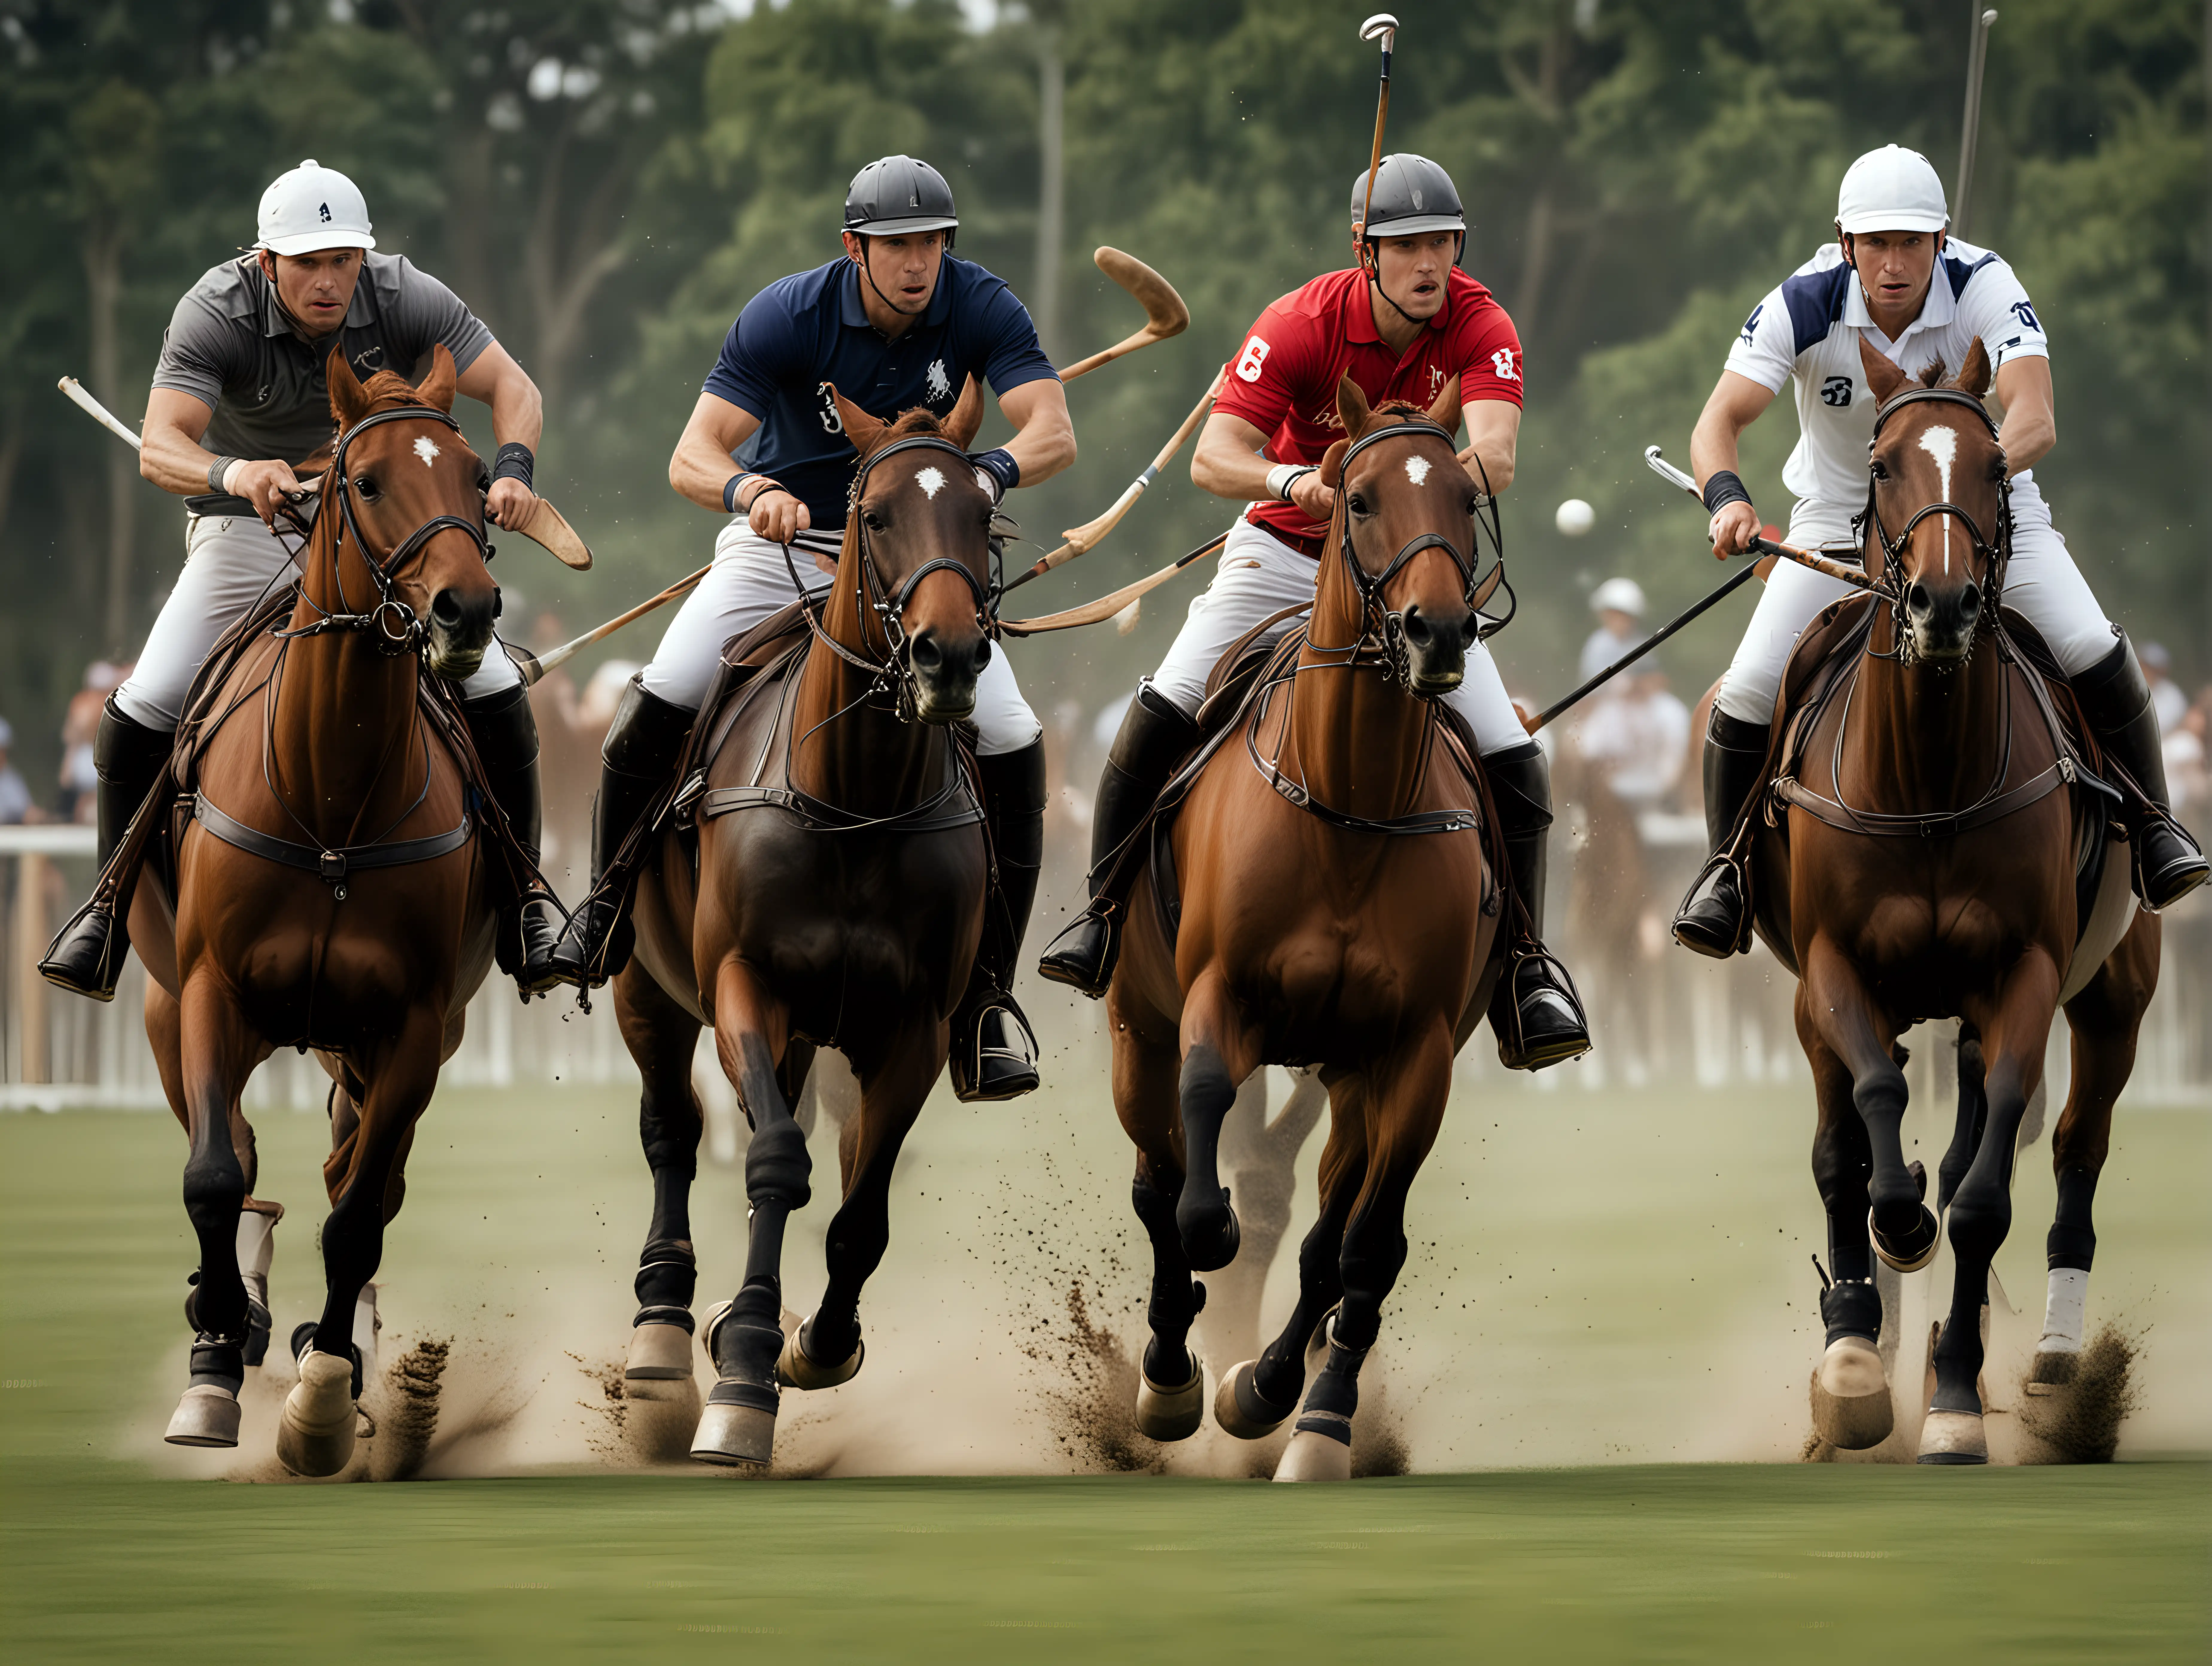 create an image of 3 polo players viewed from the side, riding alongside each other, one slightly ahead of the other, reaching out for the ball showing intensity on faces and the power of the horses.